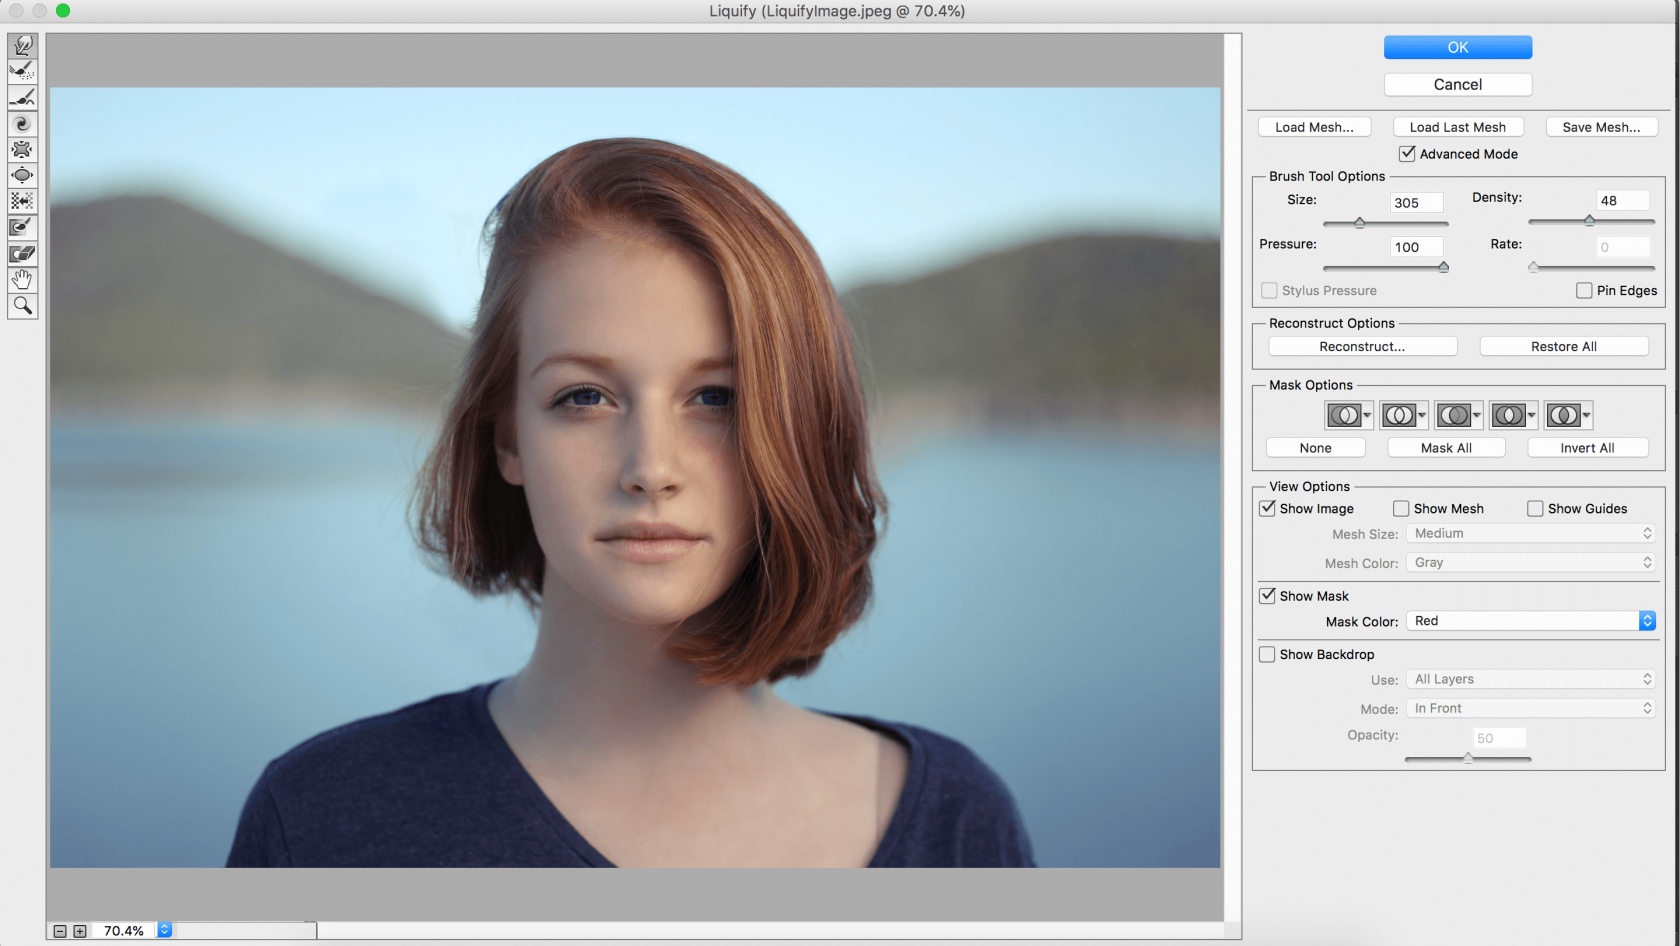 How to Use the Liquify Tool in Photoshop: Mastering the Basics Image7